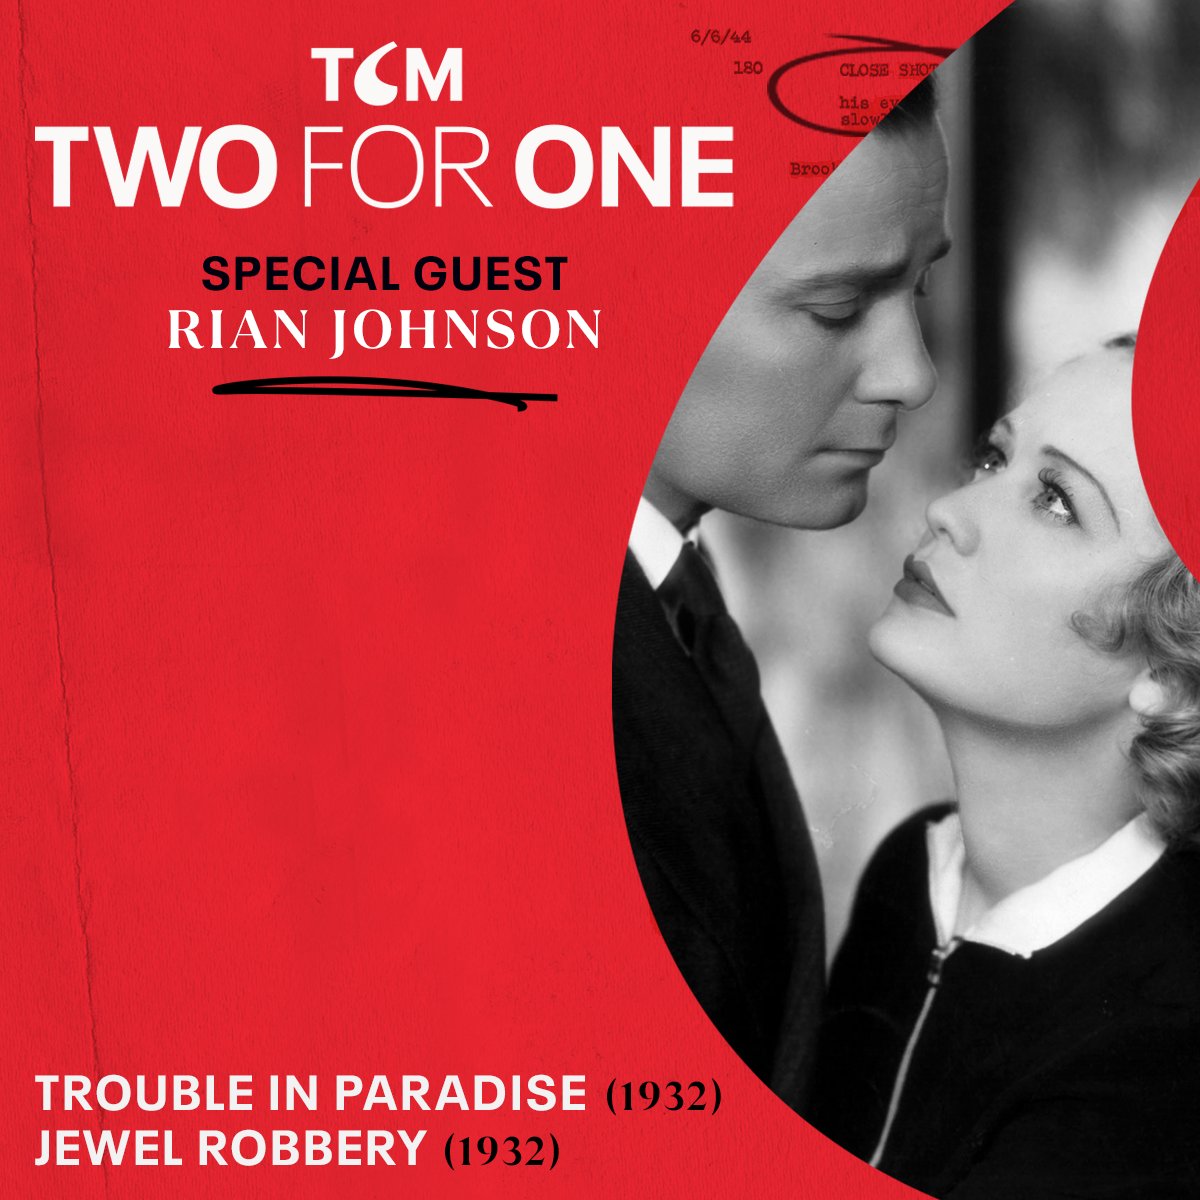 Director & writer @rianjohnson joins us for our next installment of Two for One to introduce his double-feature picks: TROUBLE IN PARADISE ('32) & JEWEL ROBBERY ('32). See the full conversation tomorrow night with @BenMank77 at 8pm ET. Learn more here: bit.ly/4atr2aR